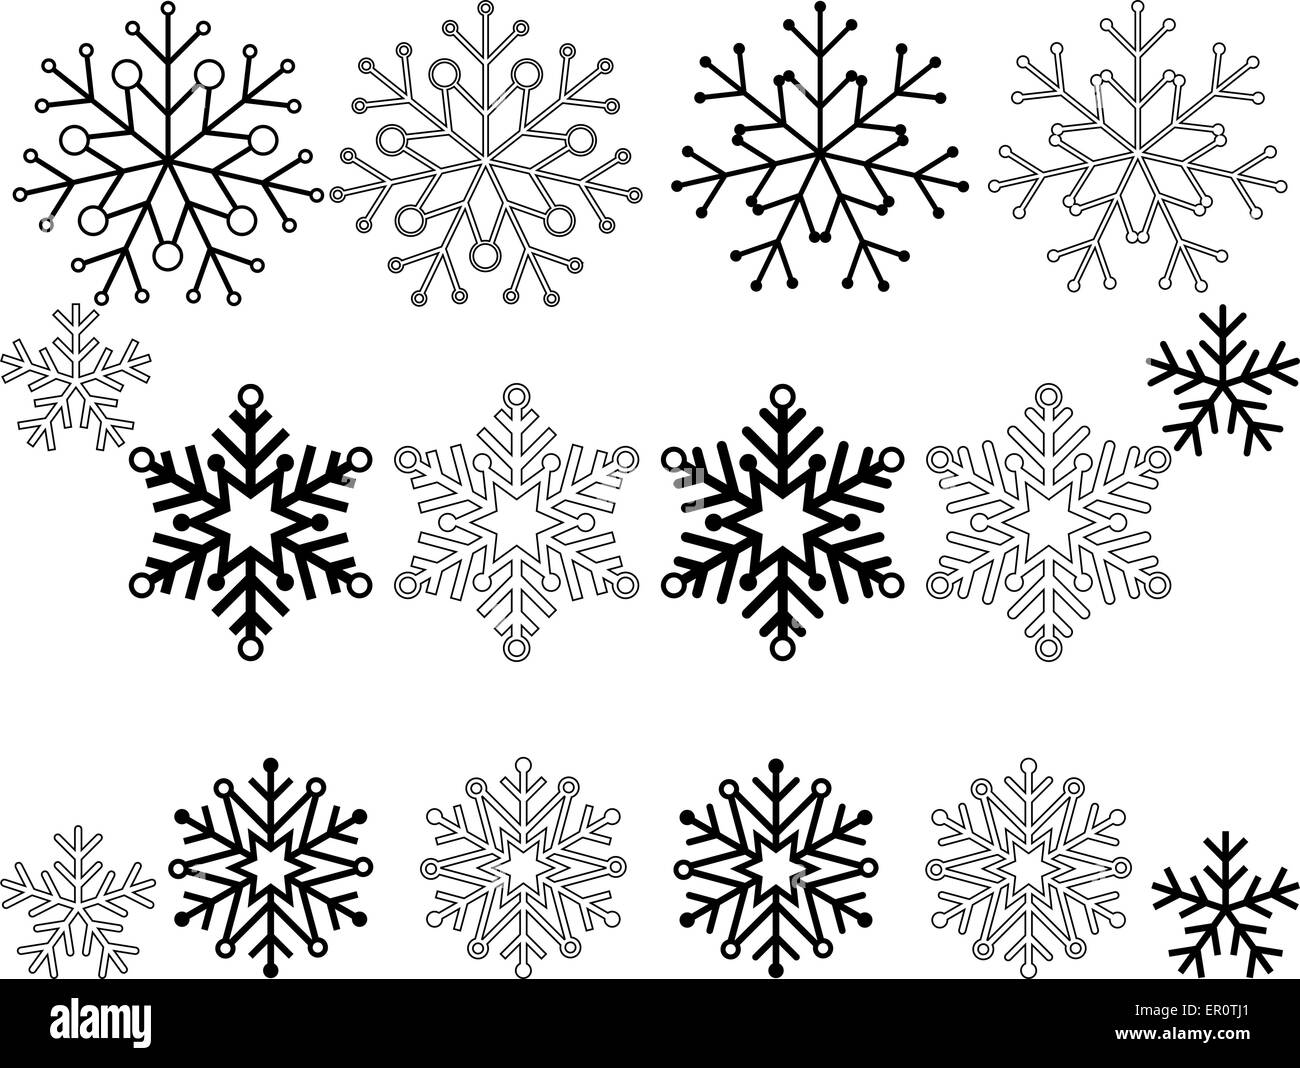 Set of 16 Snowflakes Stock Vector